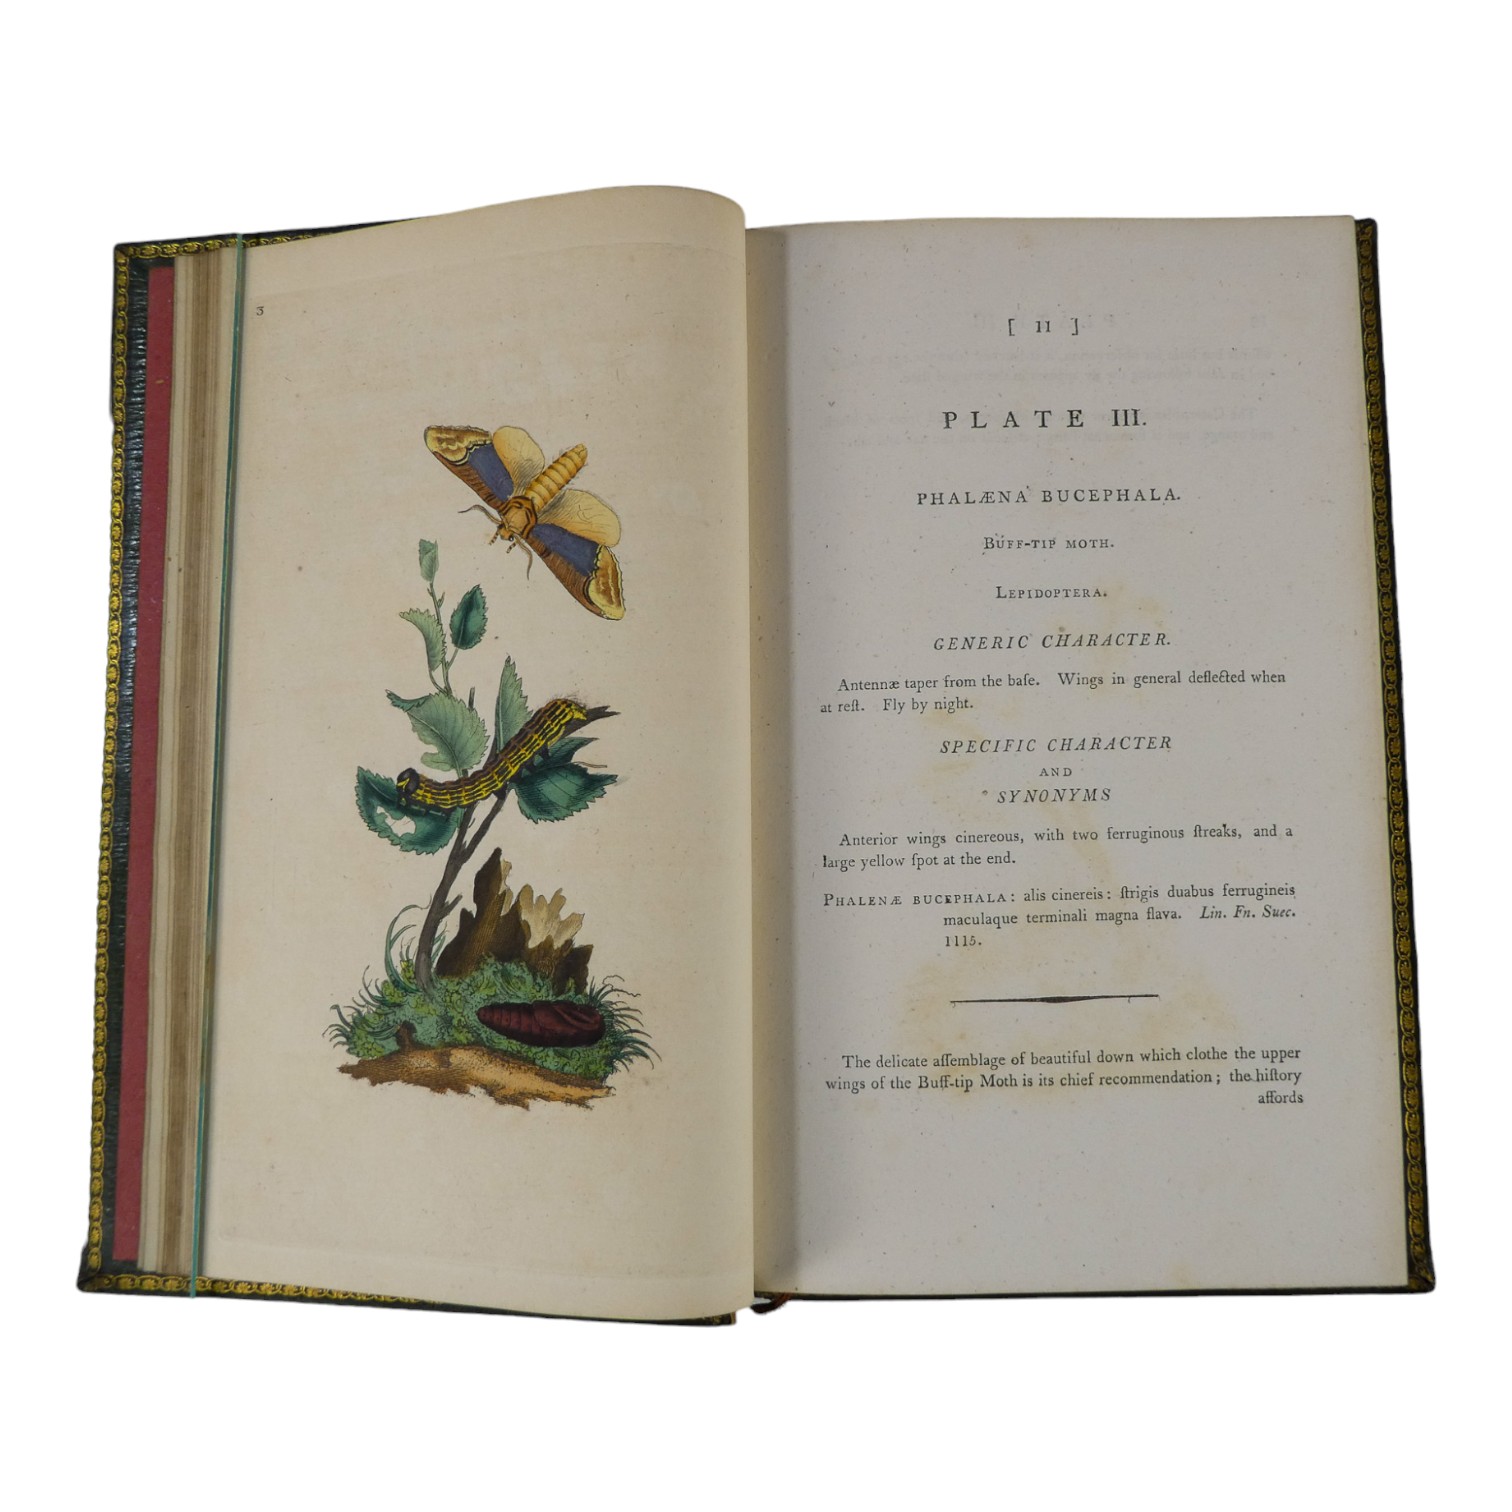 DONOVAN Edward, The Natural History of British Insects ... - published F & C Rivington 62 St Paul' - Image 4 of 33